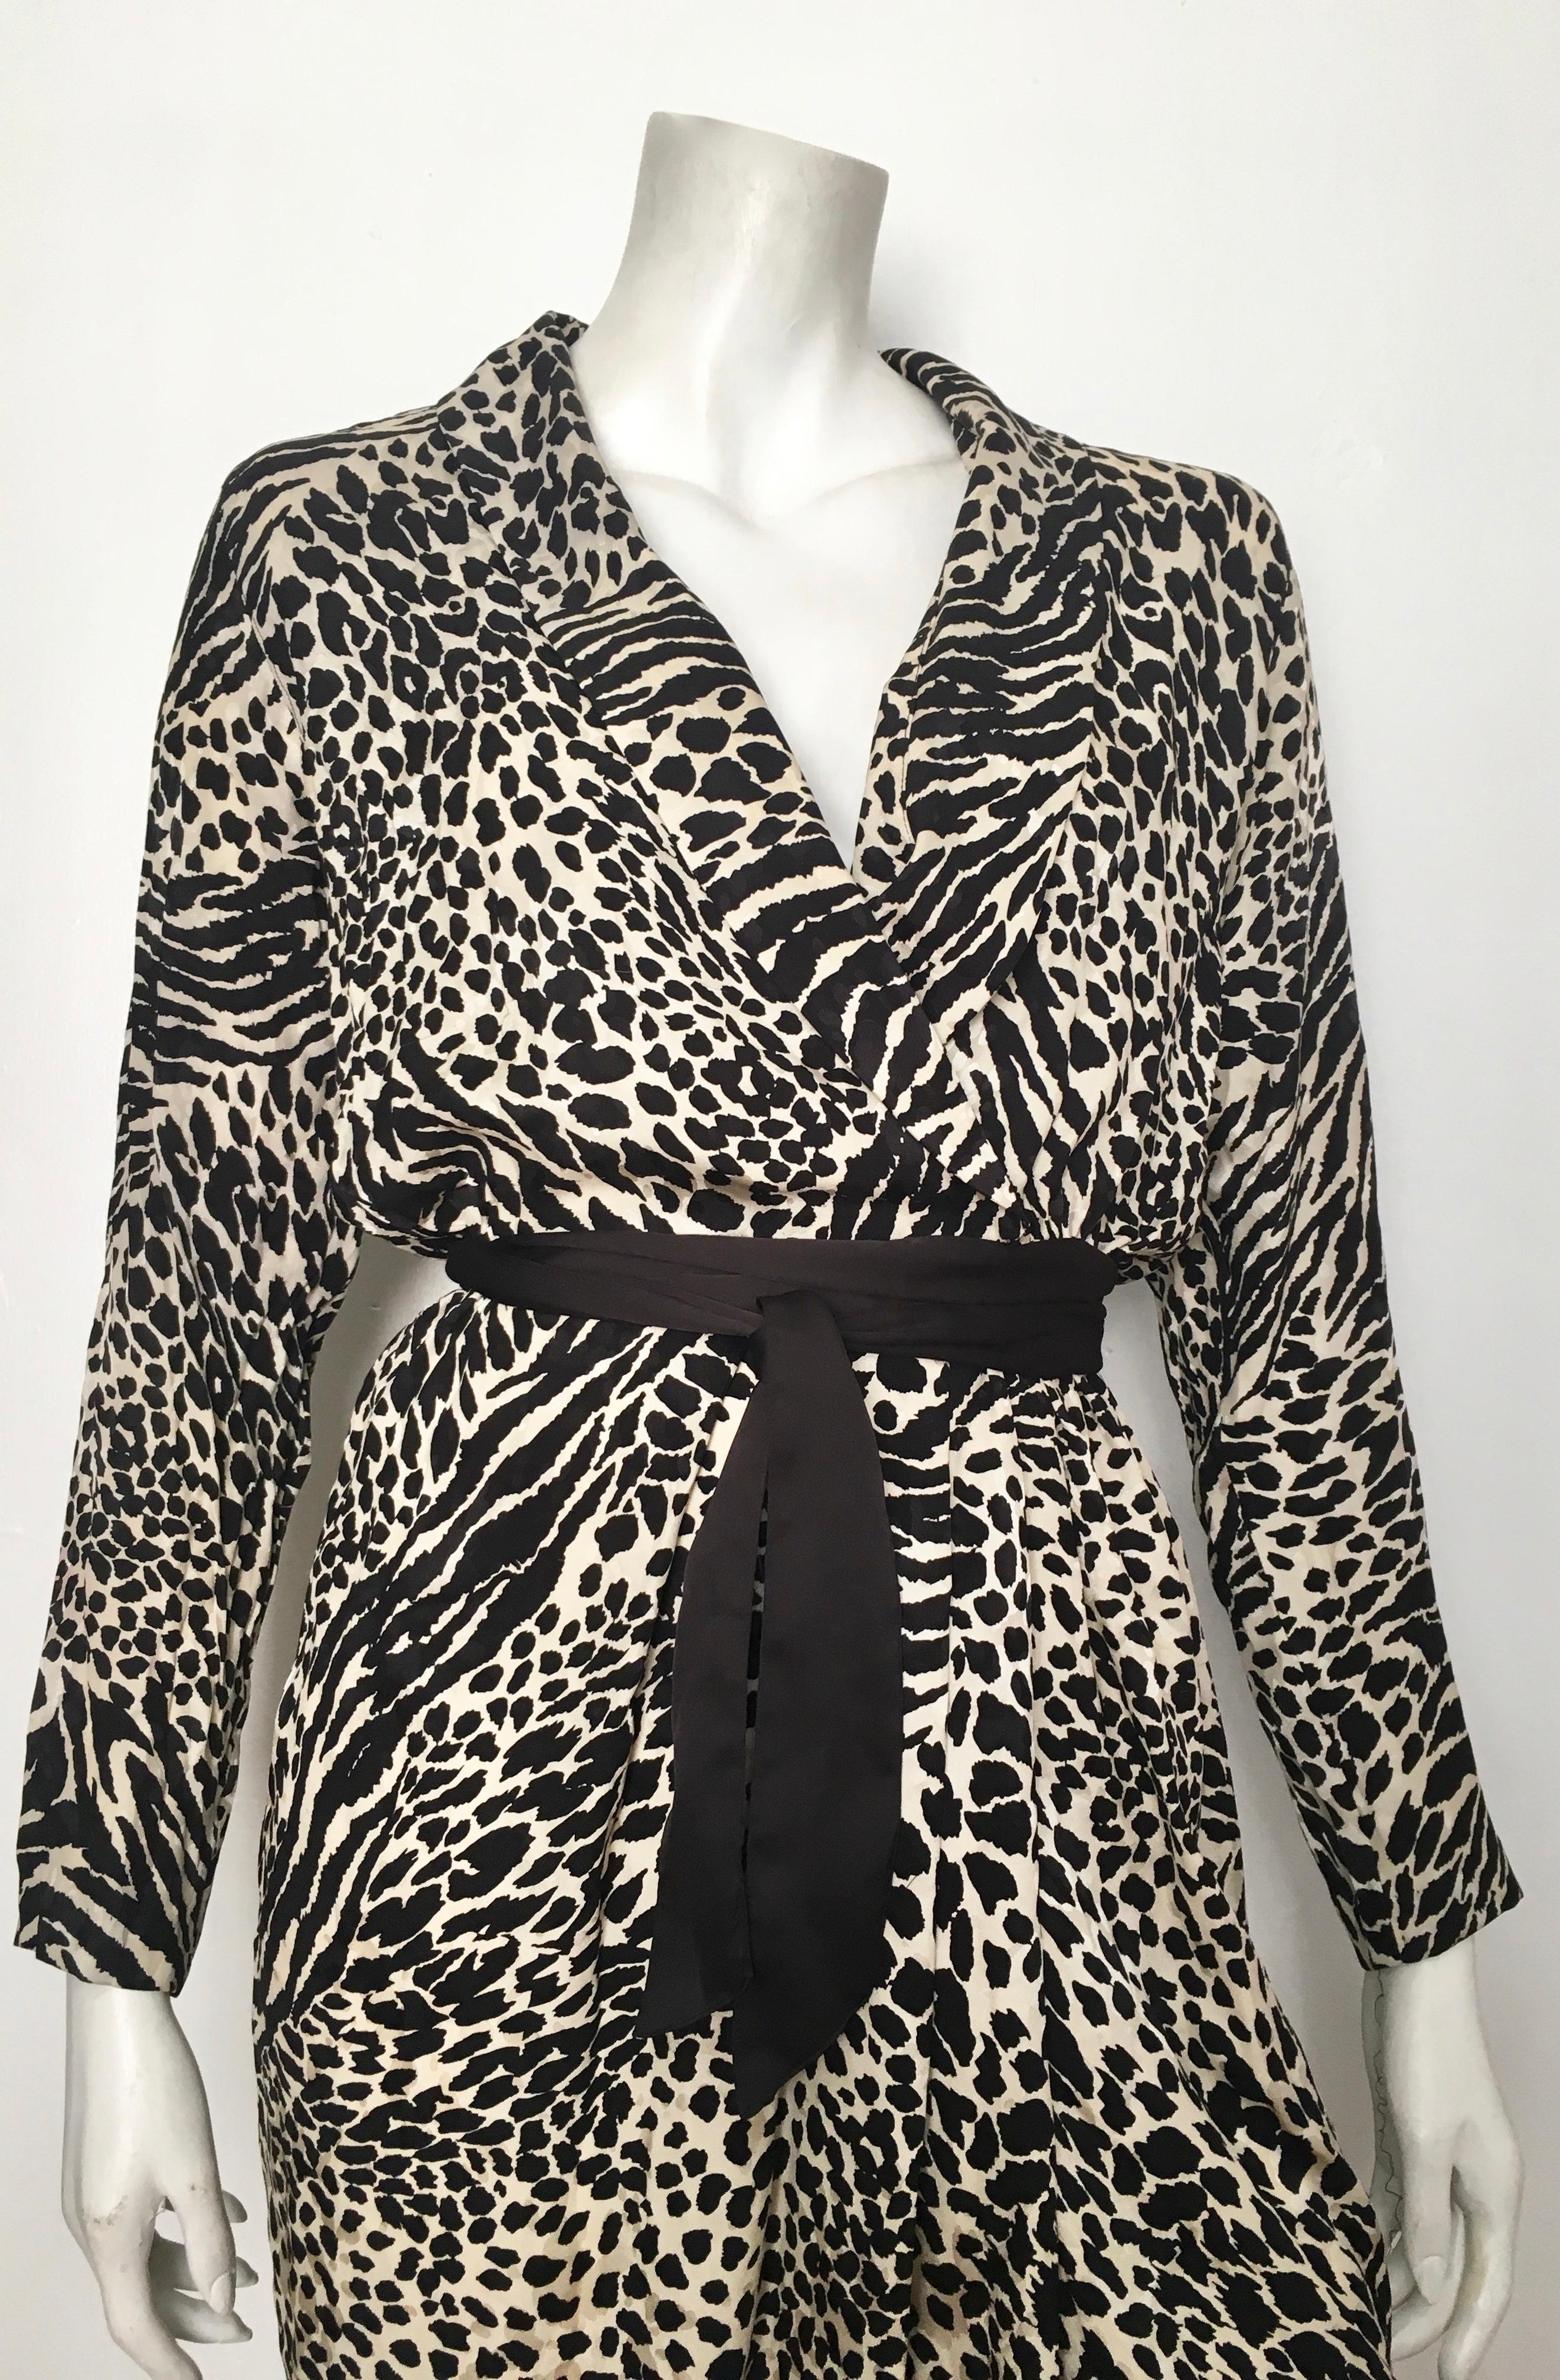 Geoffrey Beene for Lillie Rubin 1980 animal print silk dress with belt is a size 6.  The waist on this dress is 25